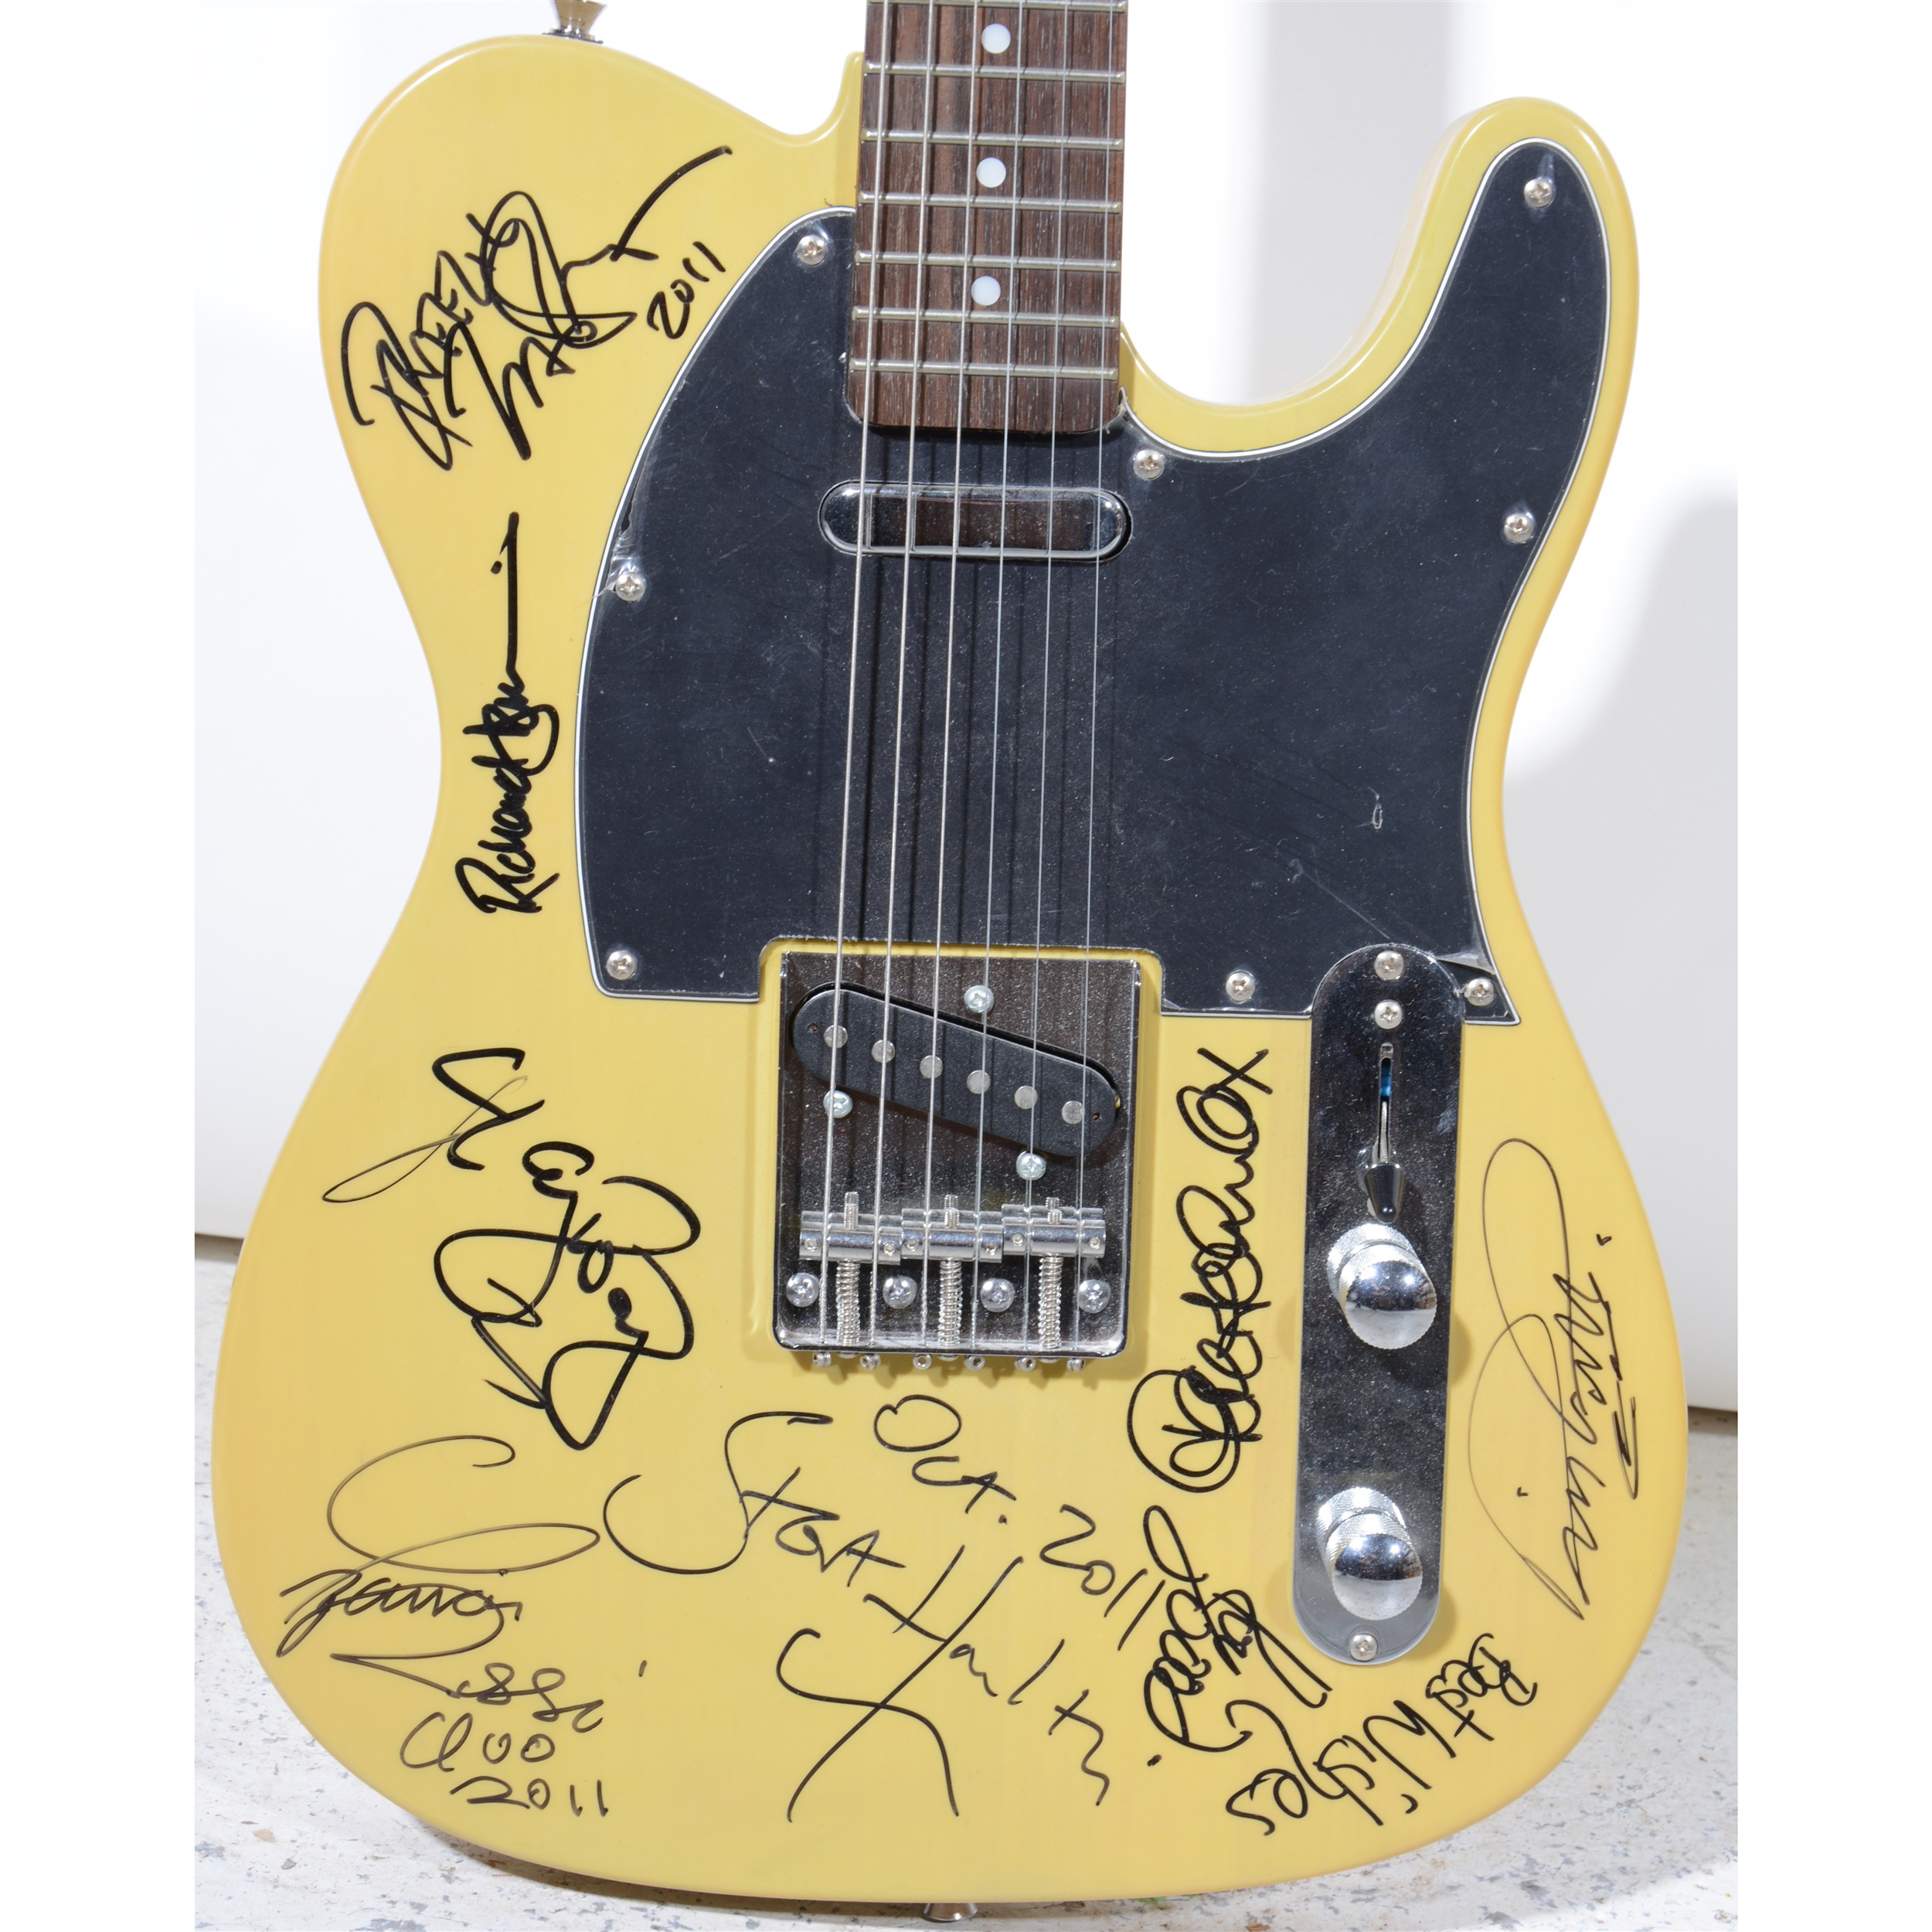 Jim Deacon Fender Telecaster style guitar, bearing signatures from Status Quo, Go West and others. - Image 2 of 2